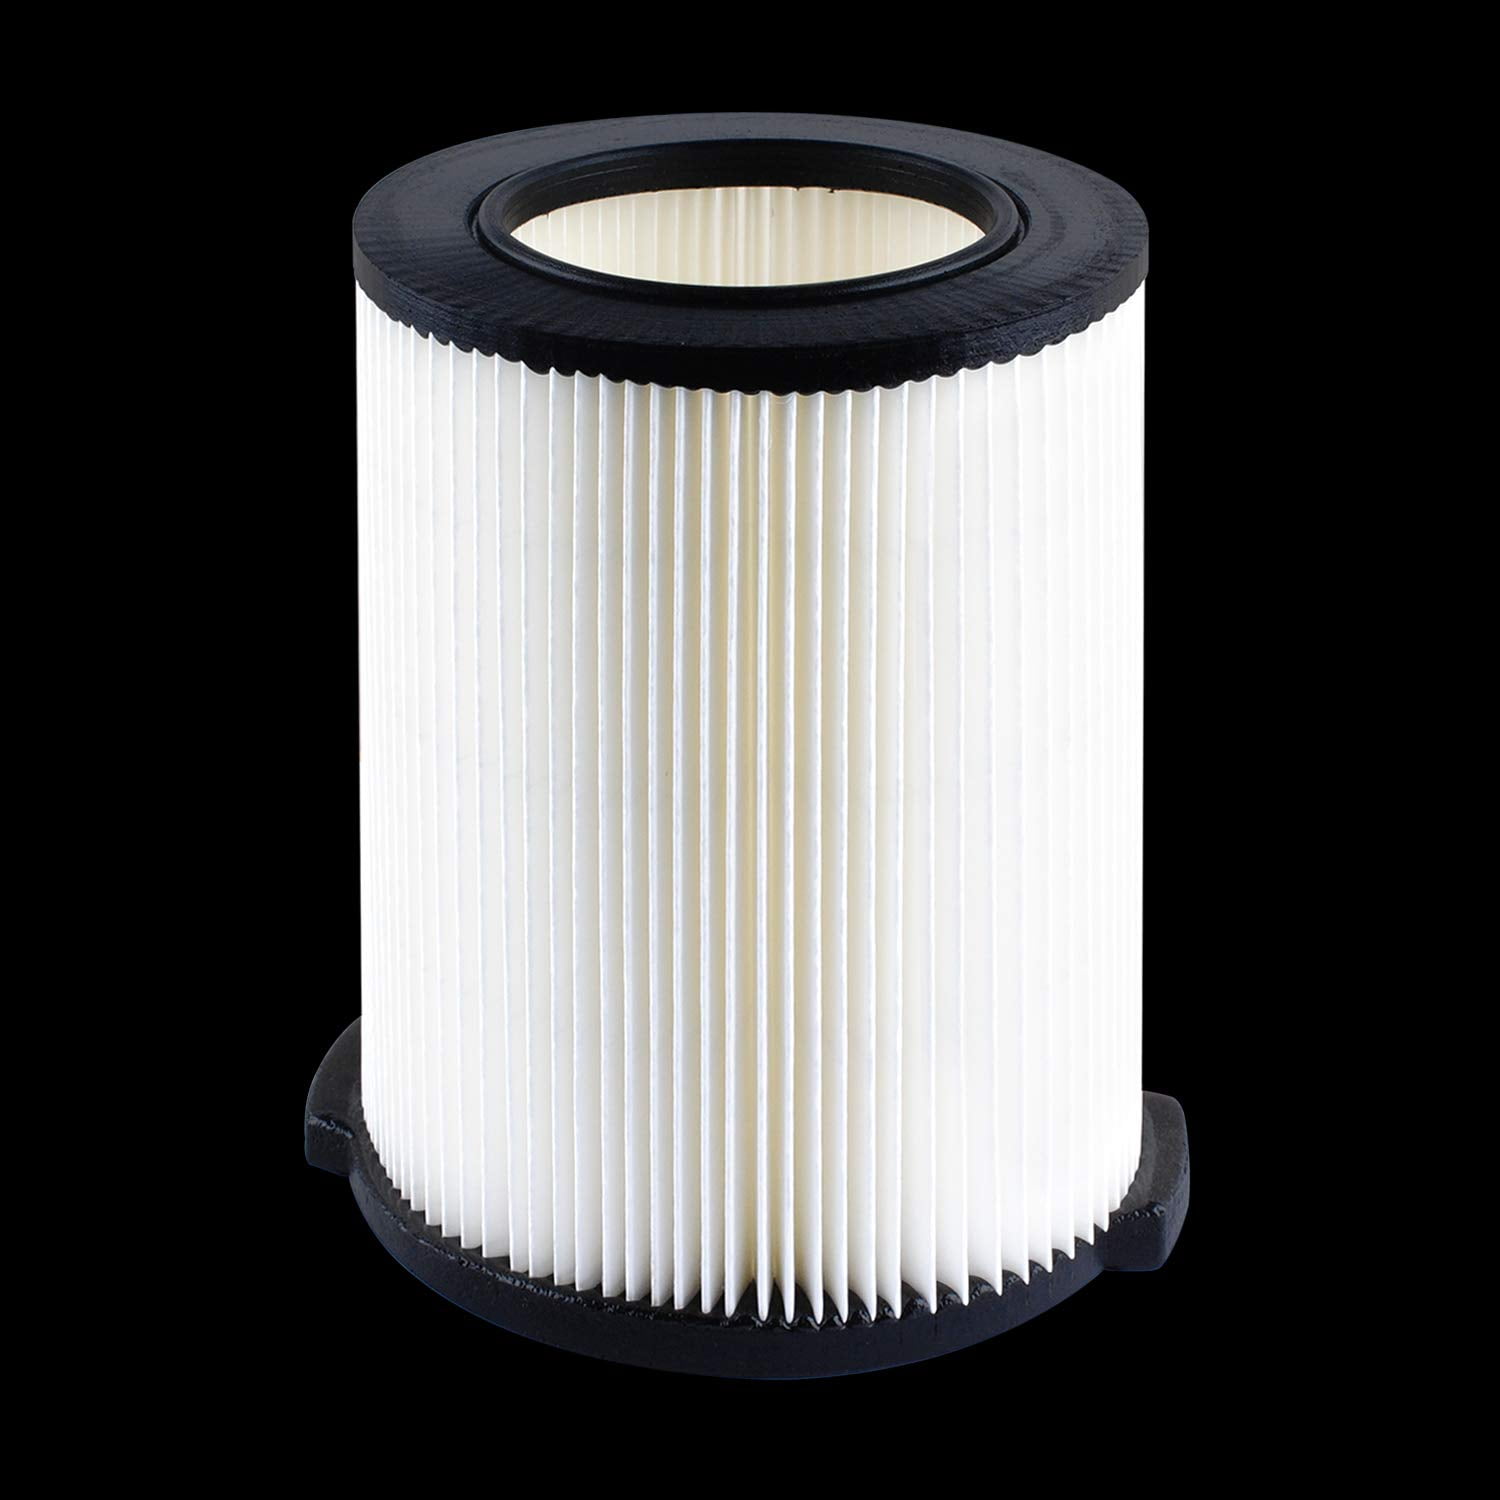 VF4000 1-Layer Pleated Paper Wet/dry Vac Dust Replacement Filter for RIDGID Vac 